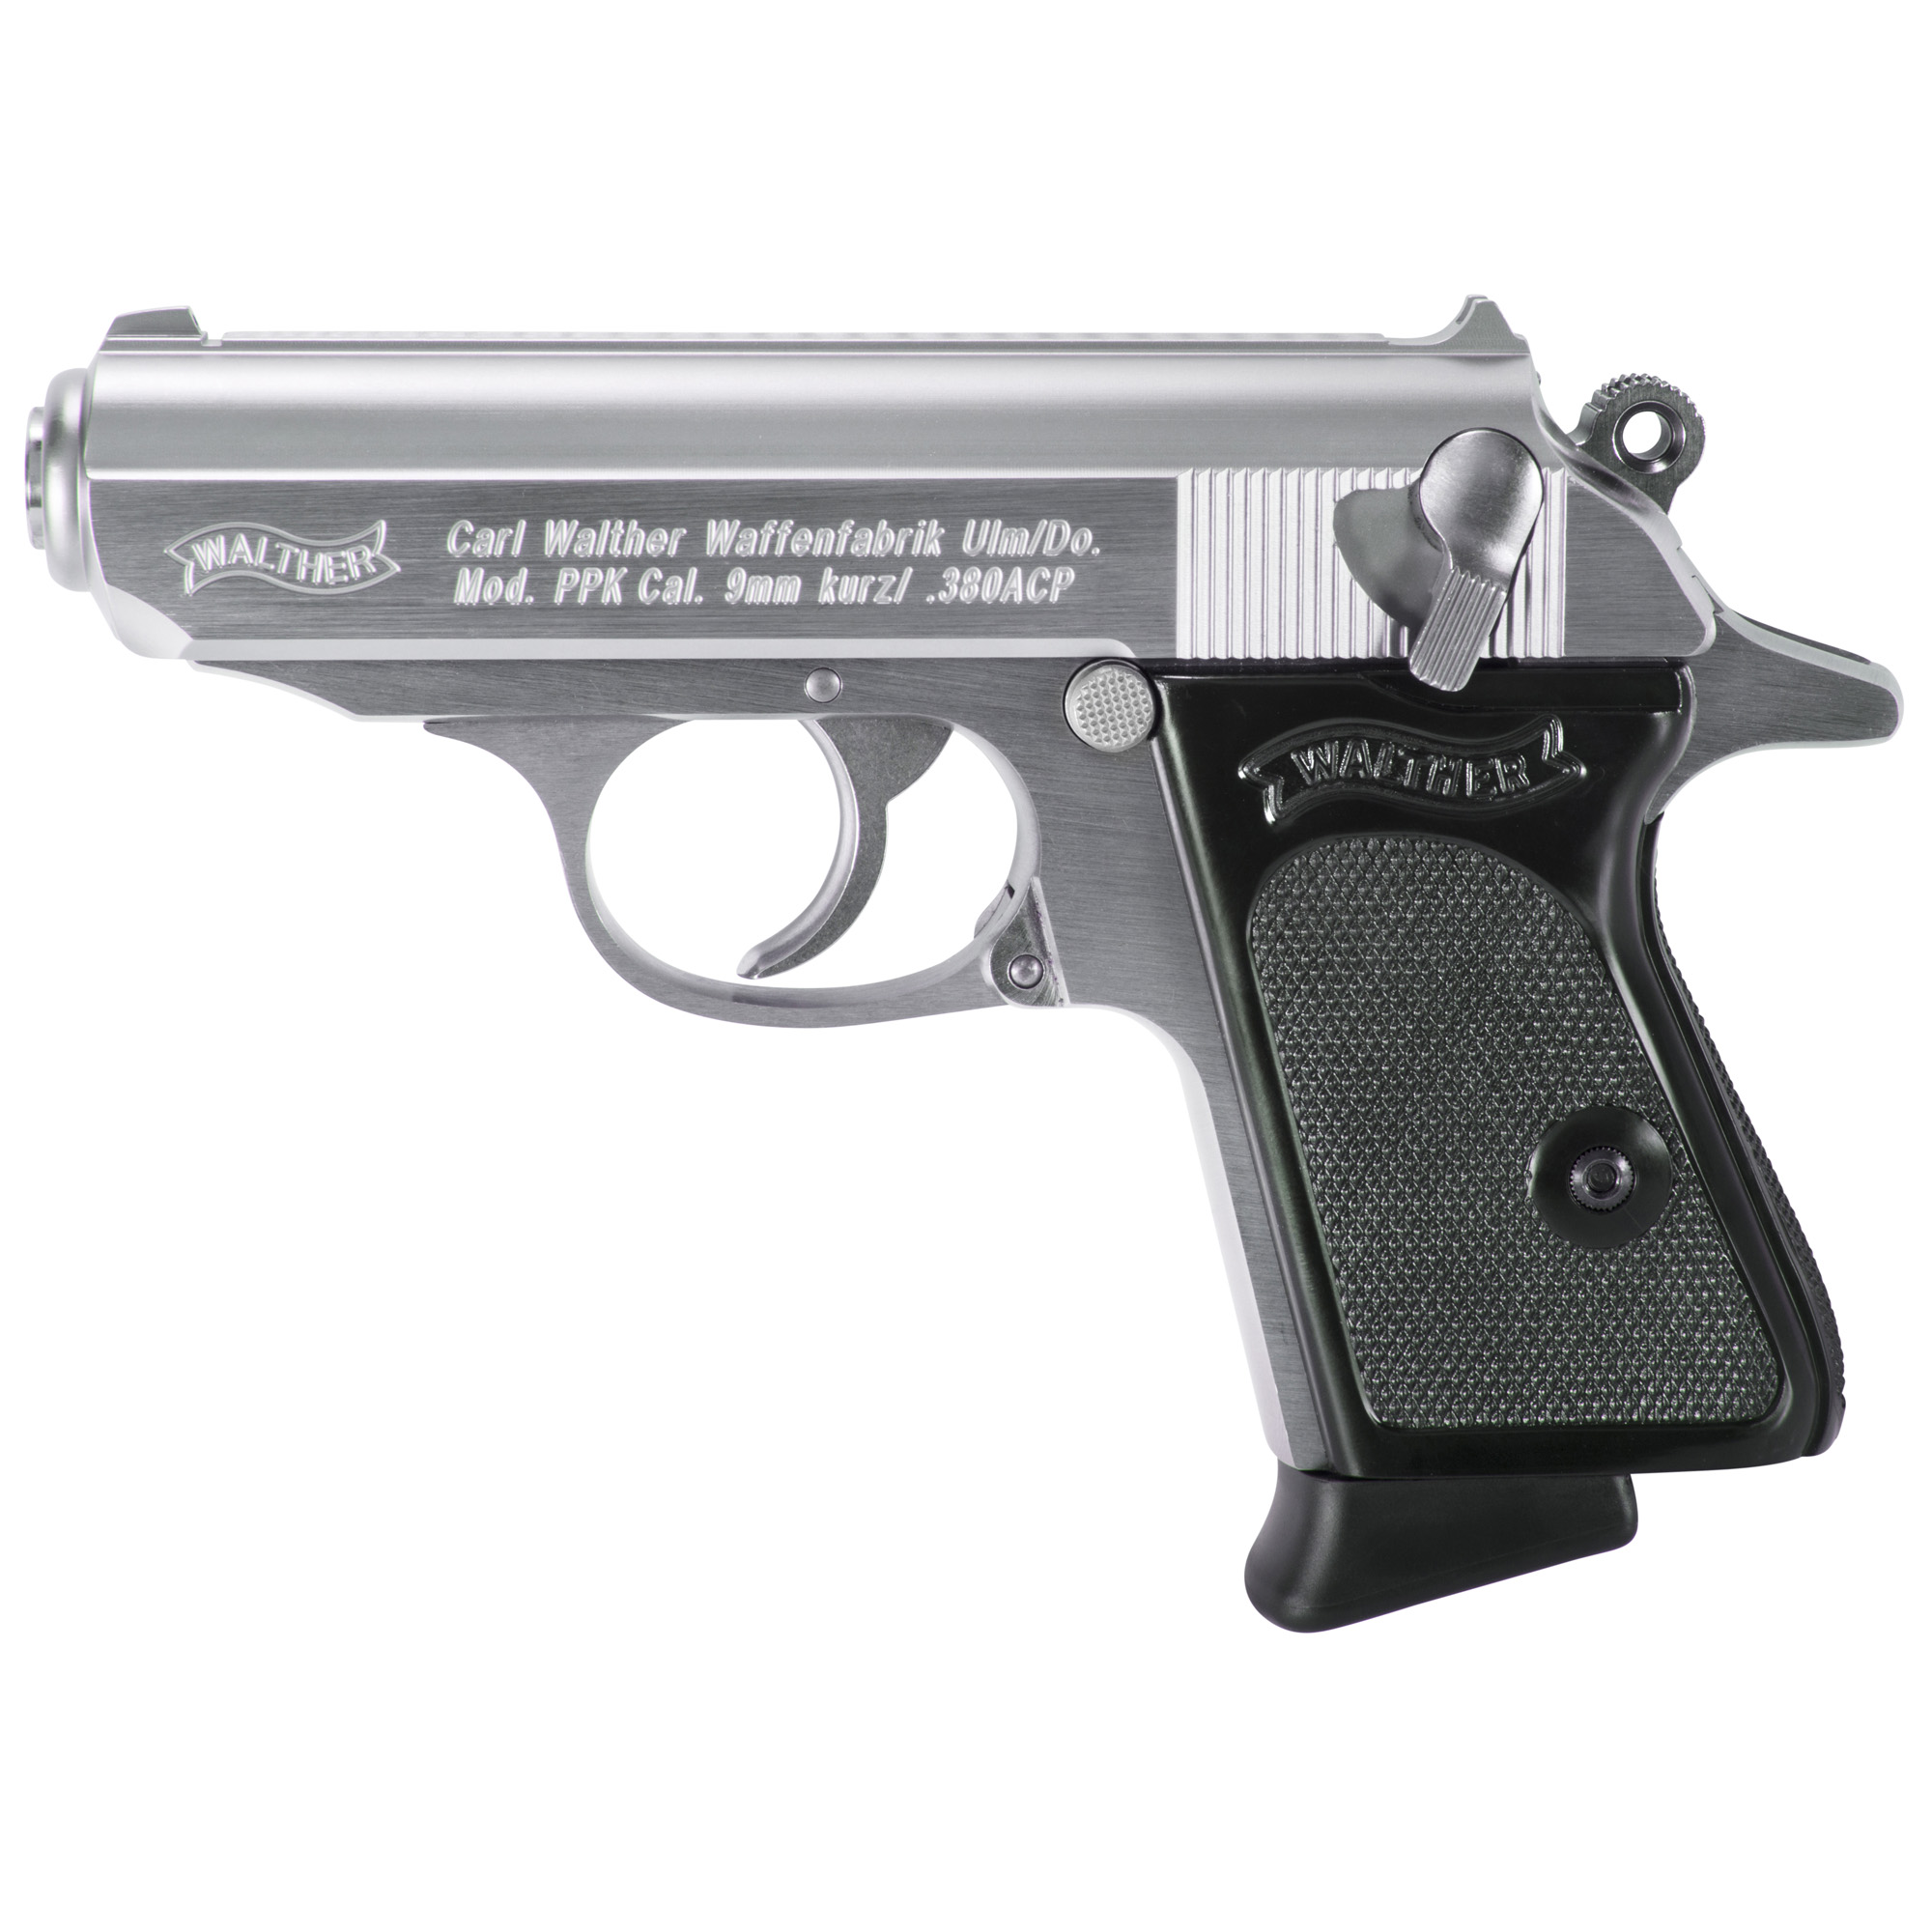 Walther Arms PPK 380 ACP Pistol Stainless/Silver, 3.3" Barrel, 6+1 Rounds, 3-Dot Sights, Manual Safety Checkered Grip Panels,